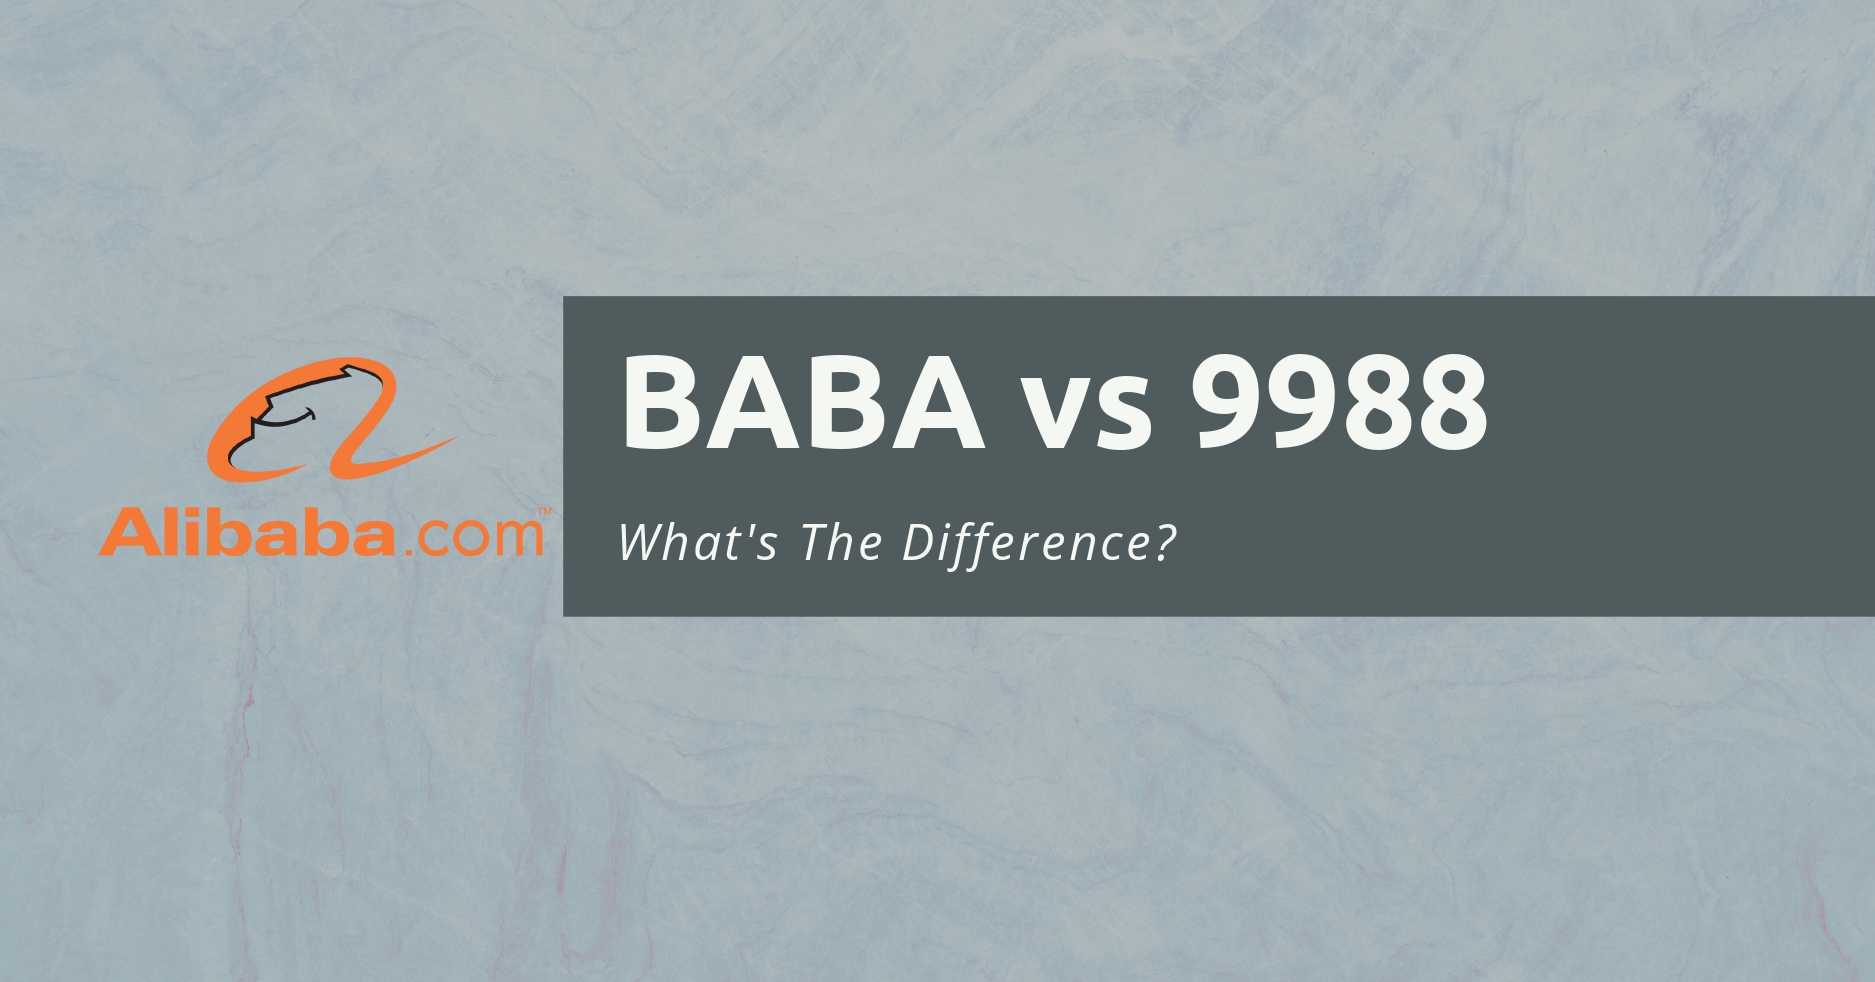 What is the difference between BABA US and 9988 HK?